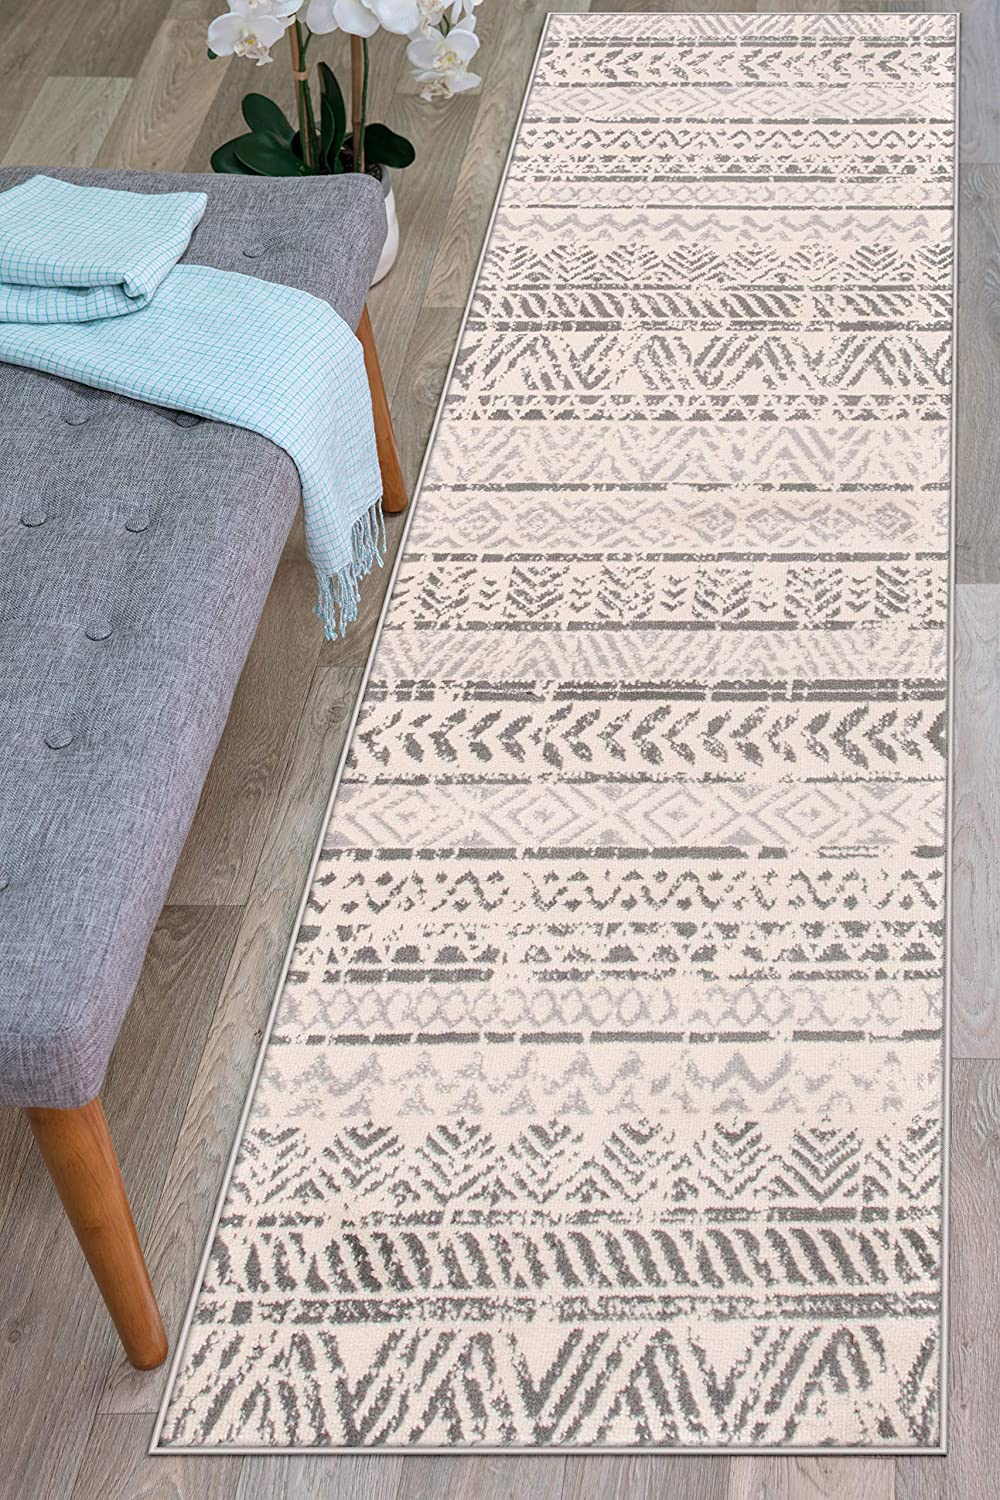 Details about   Rugshop Geometric Bohemian Design Area Rug 5' x 7' Gray 